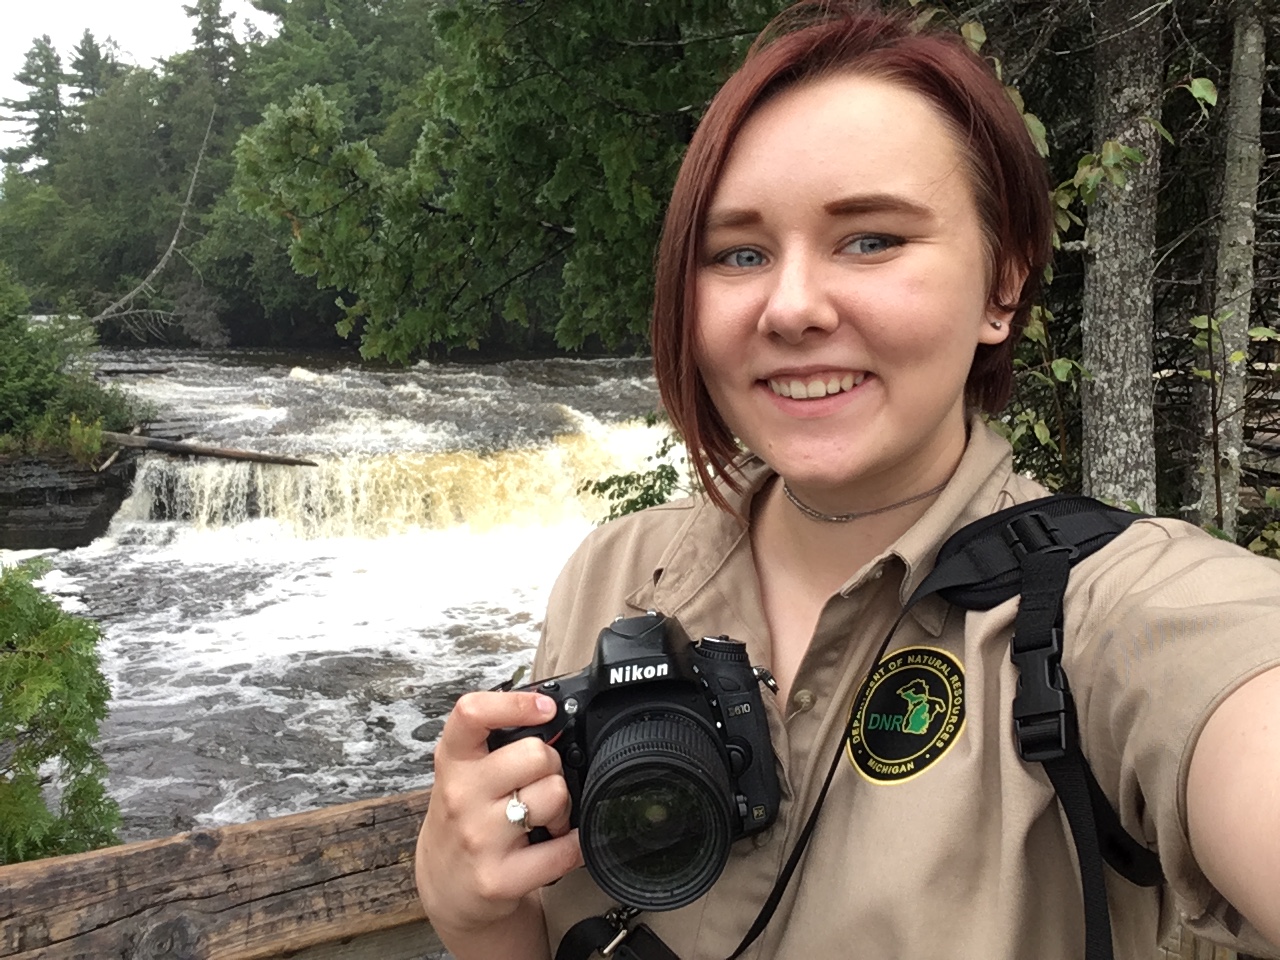 "Lyla Luoto in front of a river at MI state park"